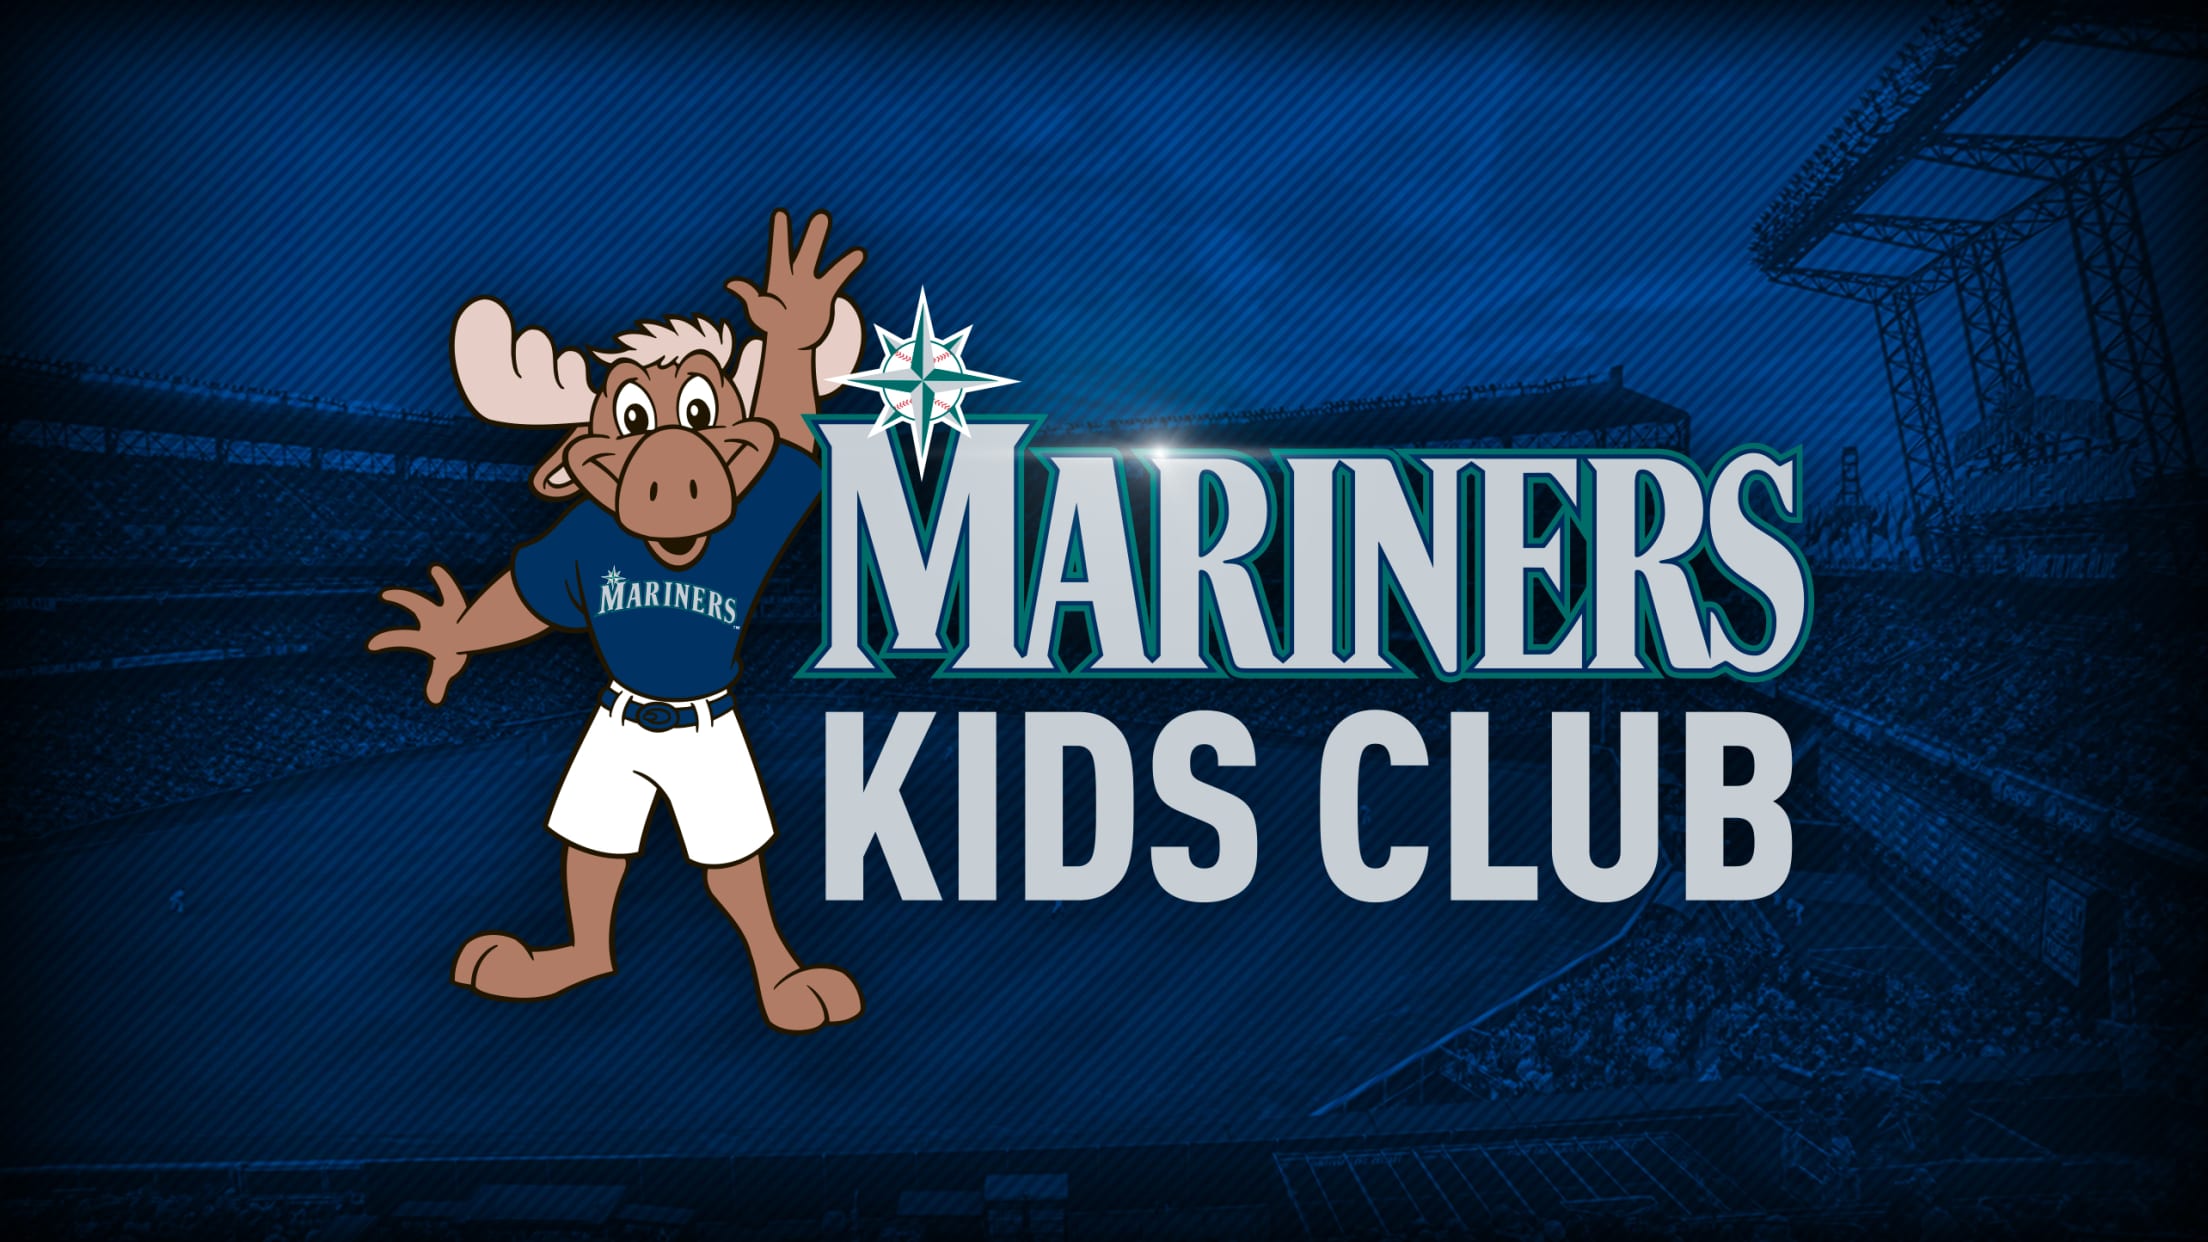 Why a Youth Movement May Make the Mariners Fun Again